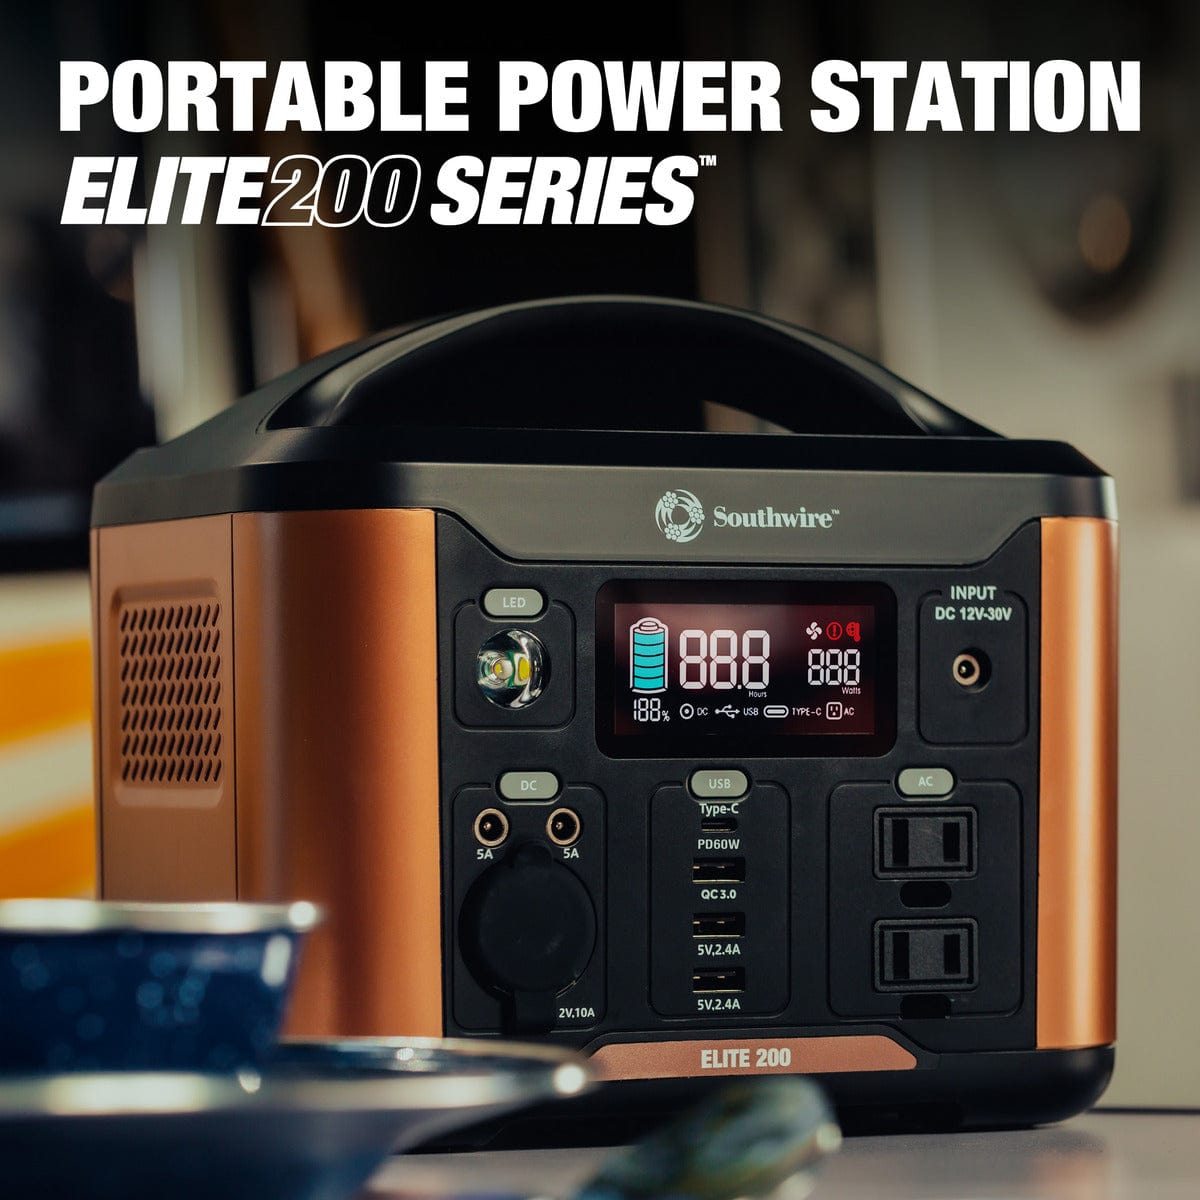 Telescopes Canada Power Supply Southwire Elite 200 Series™ Portable Power Station - 53250